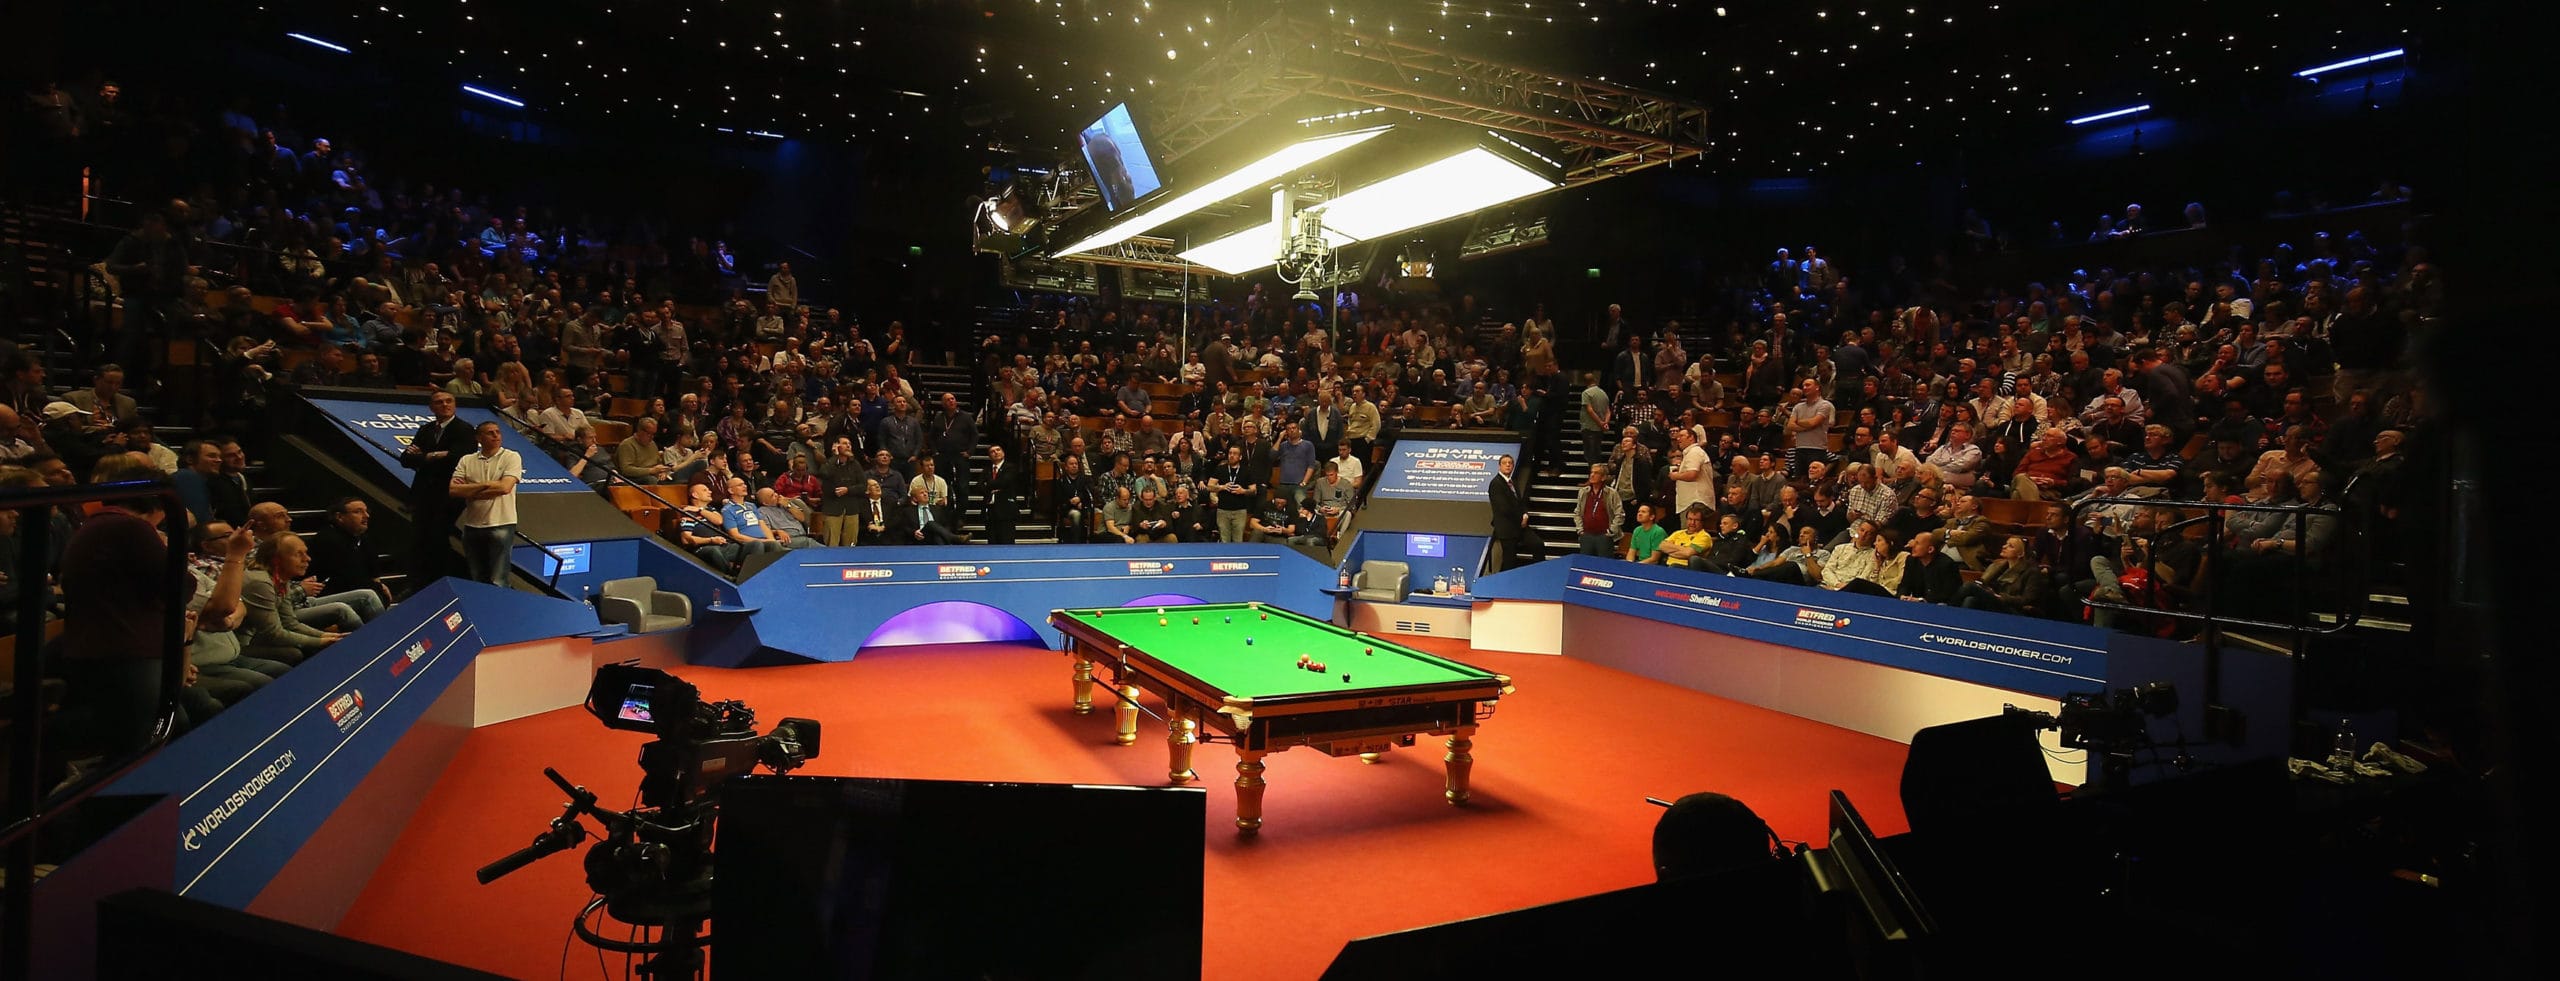 Analysis: Who are the 10 best snooker players in the world?